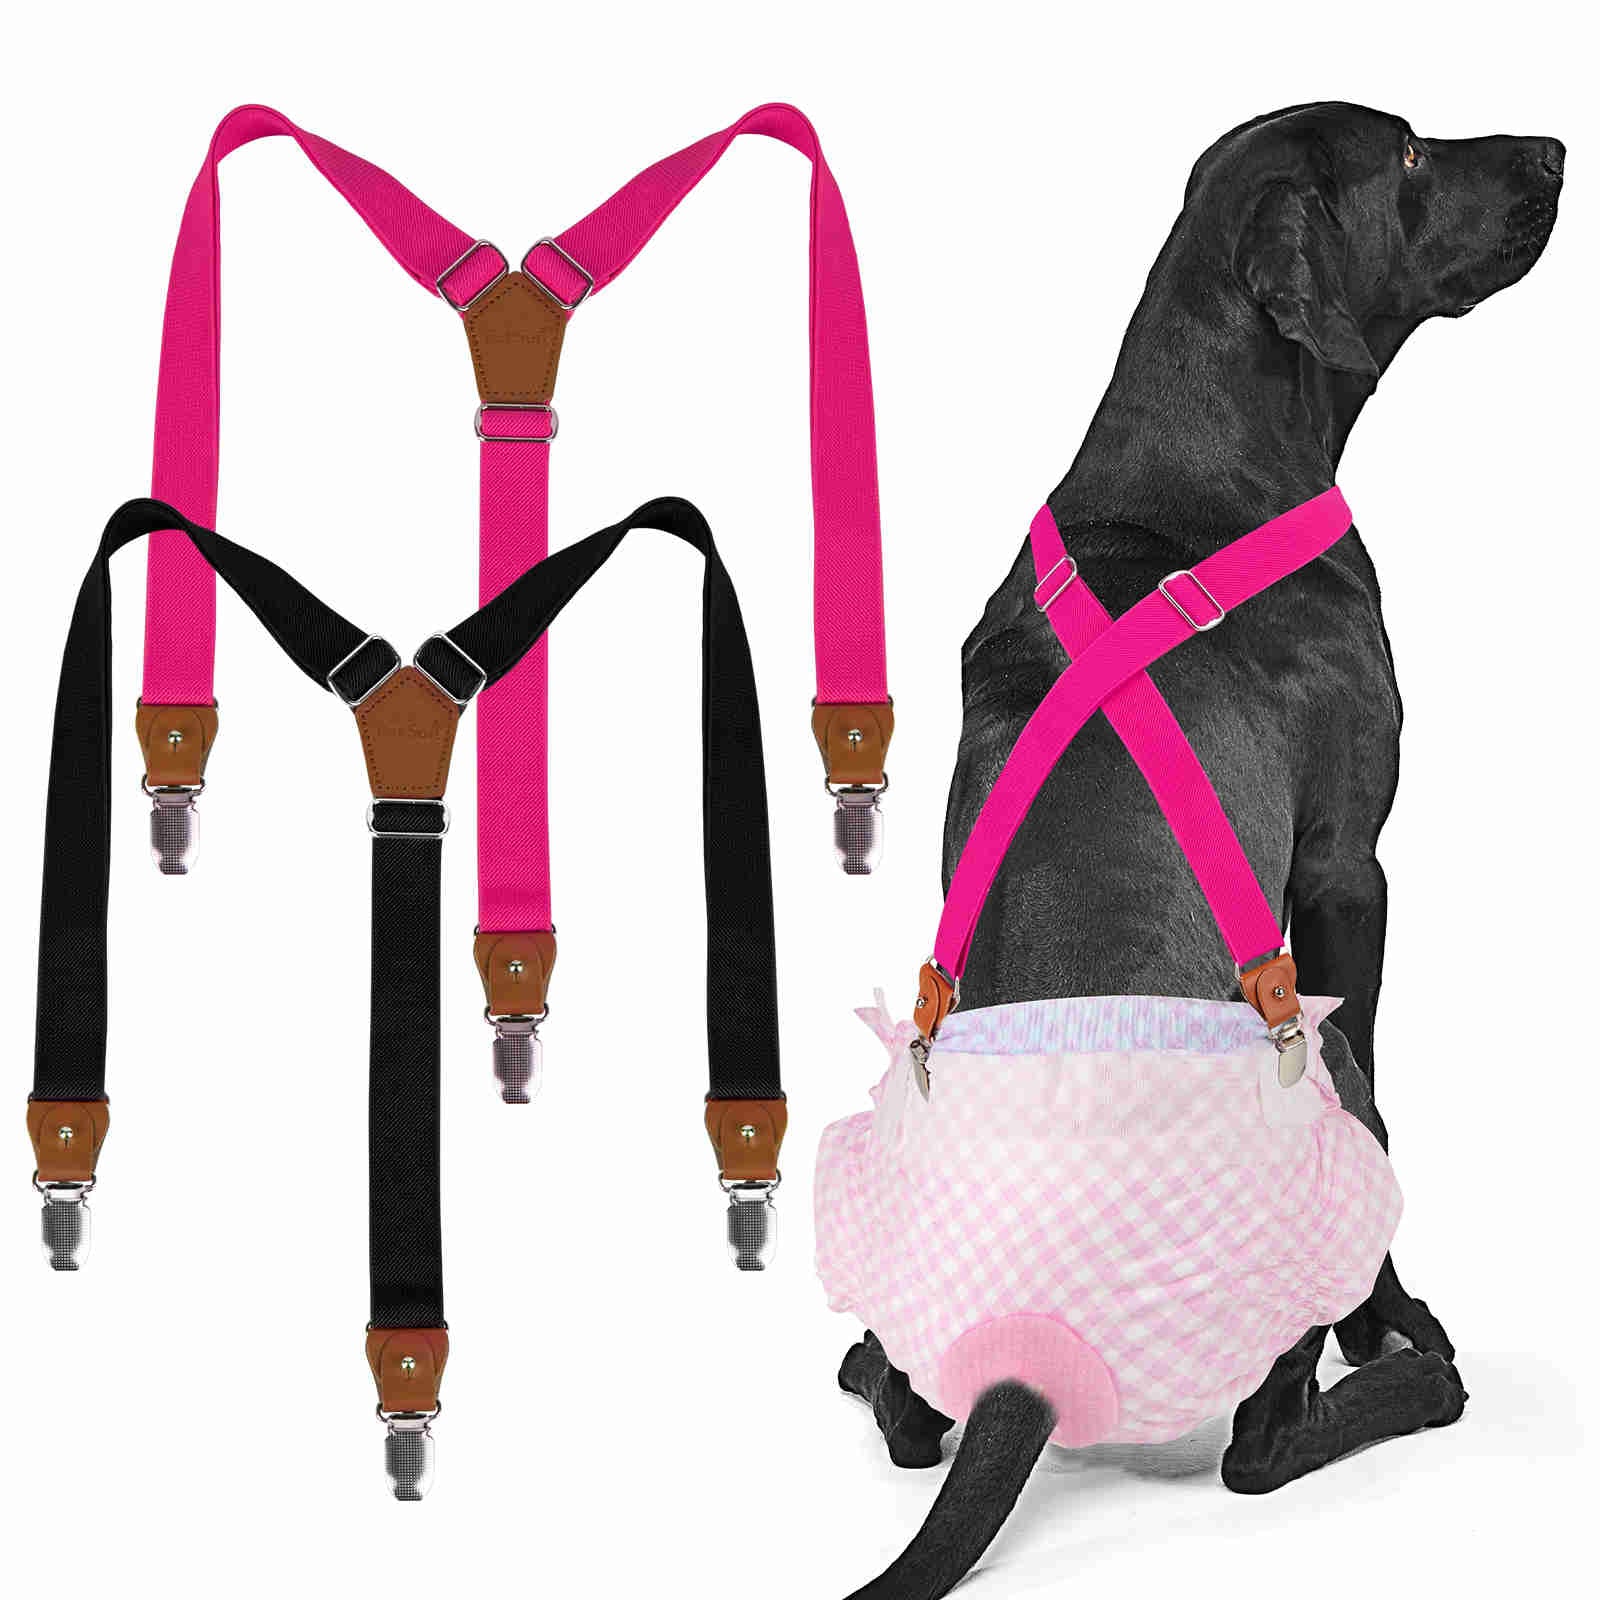 Dog Diaper Keeper For Male Dog And Female Dog Diapers, 2 Pcs Pack (Black & Pink)